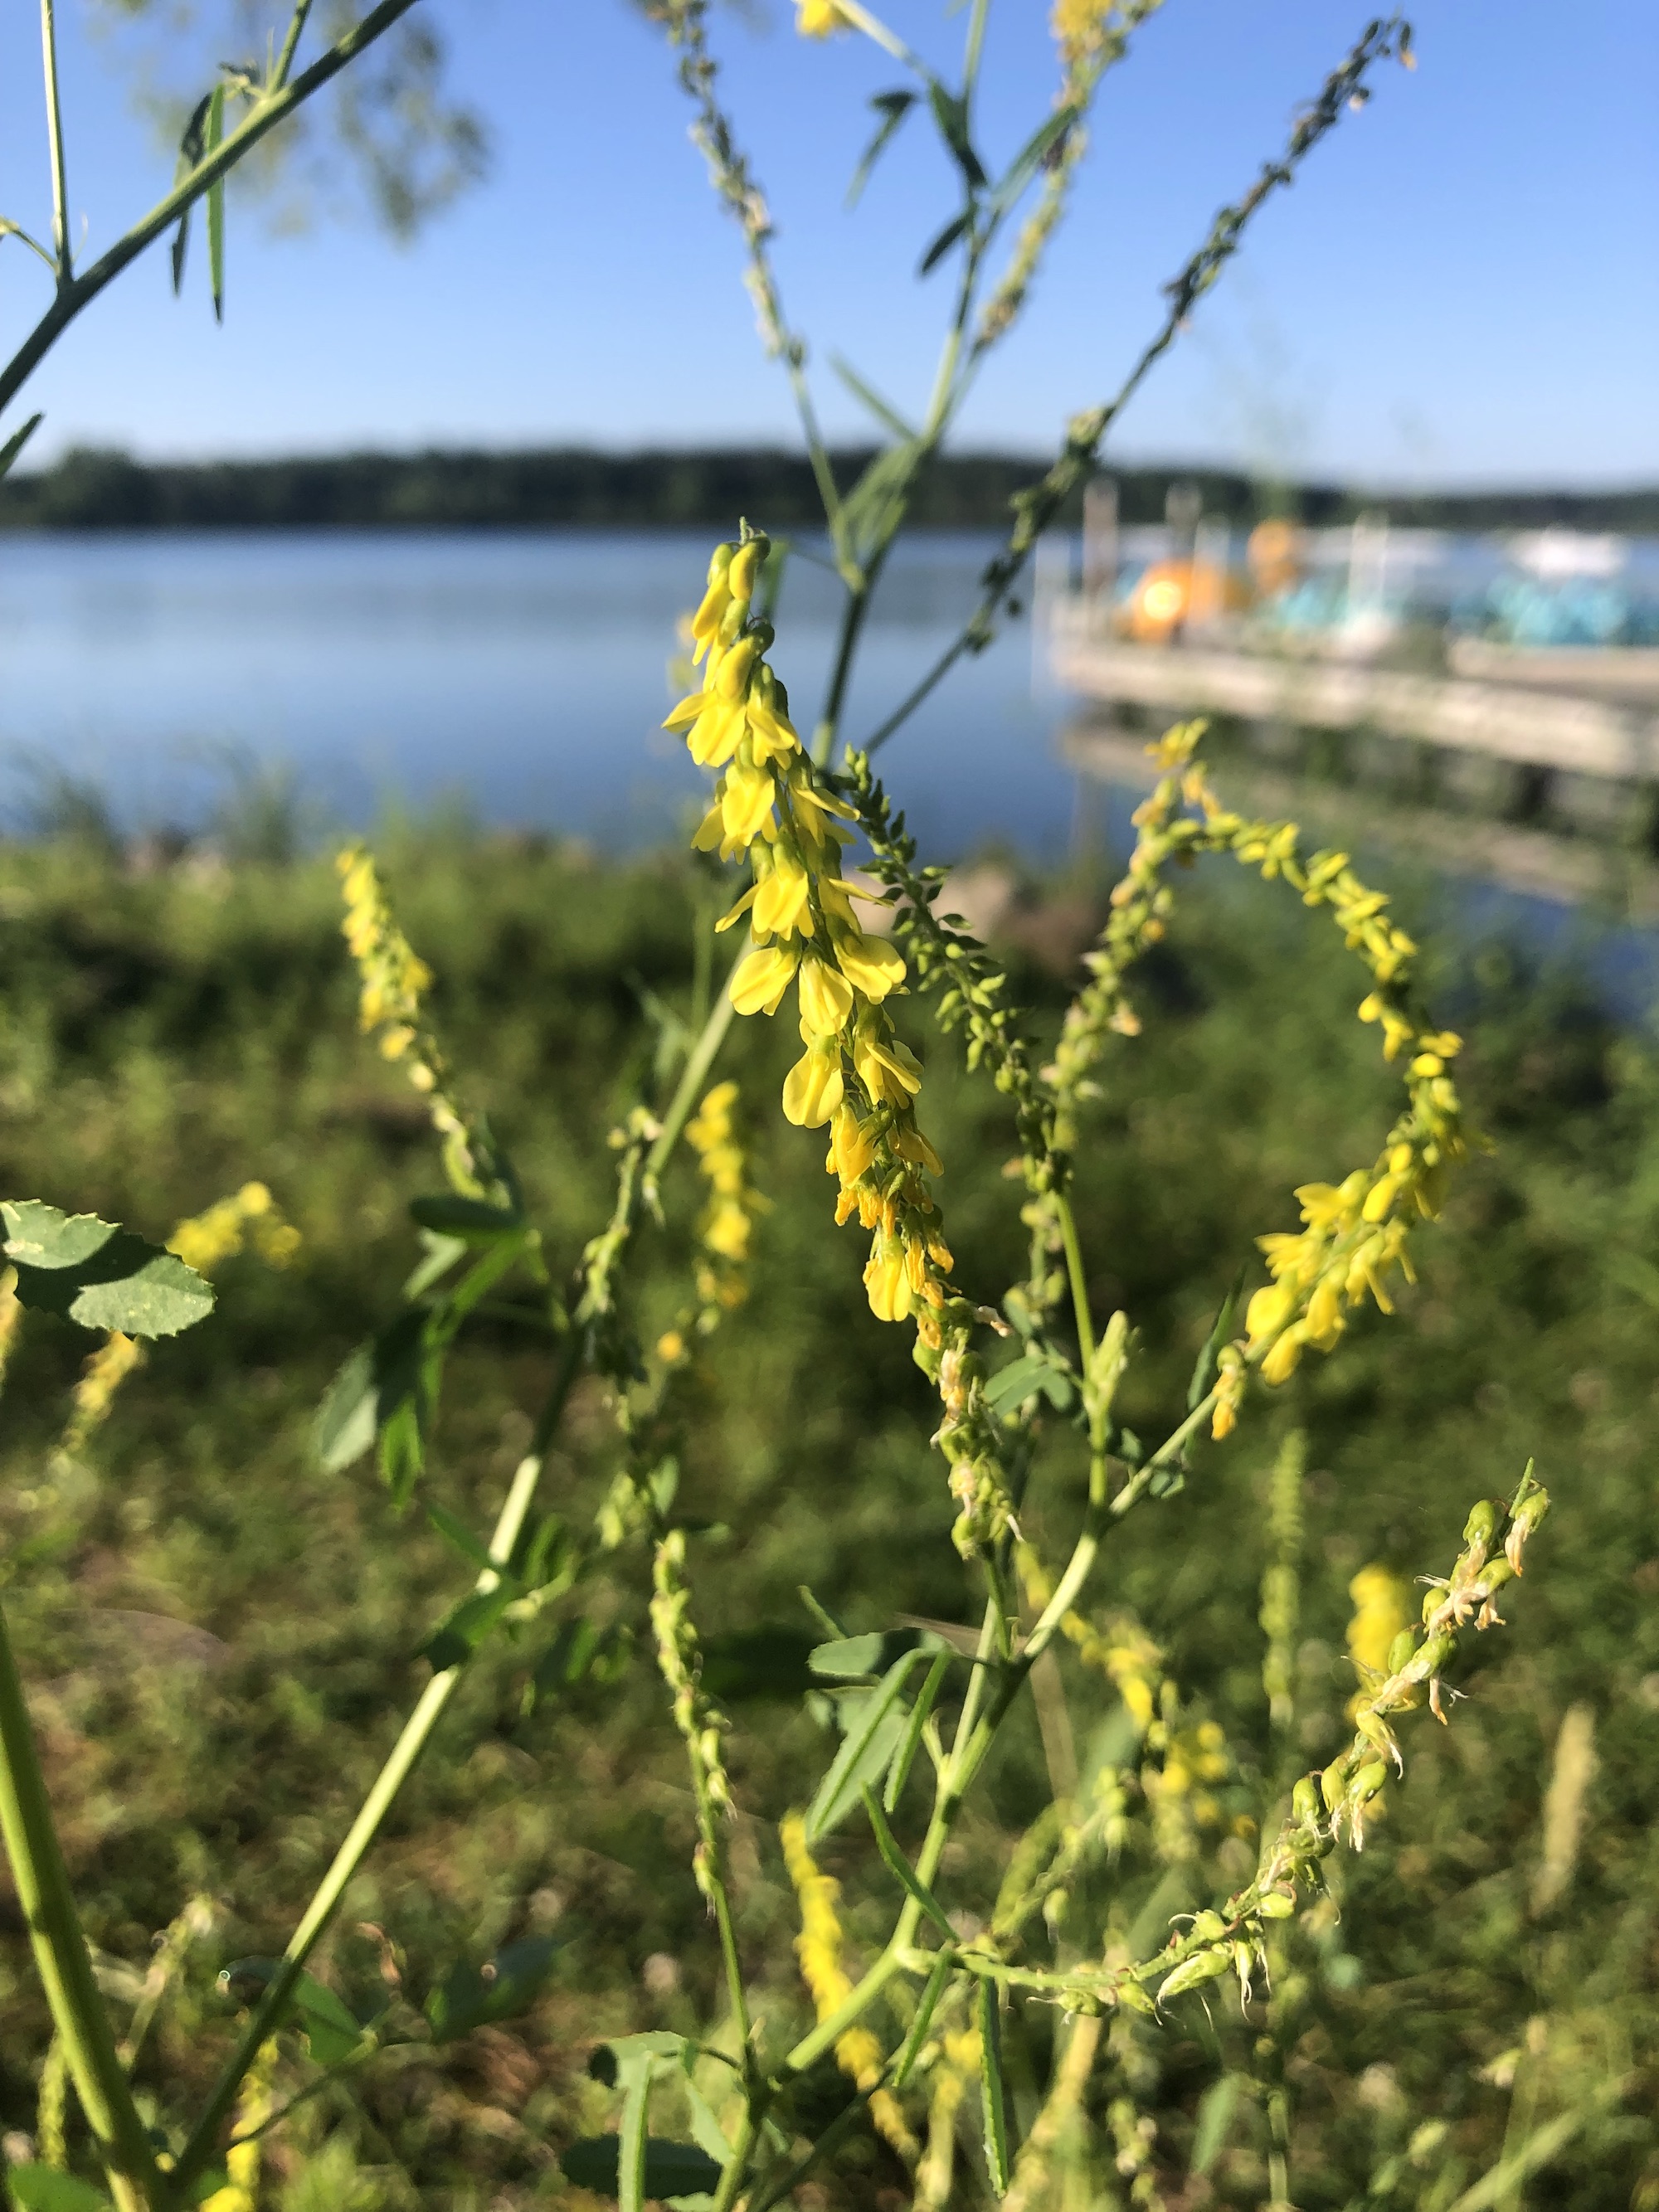 Yellow Sweet Clover by Lake Wingra at Wingra Boats in Madison, Wisconsin on June 27, 2022.